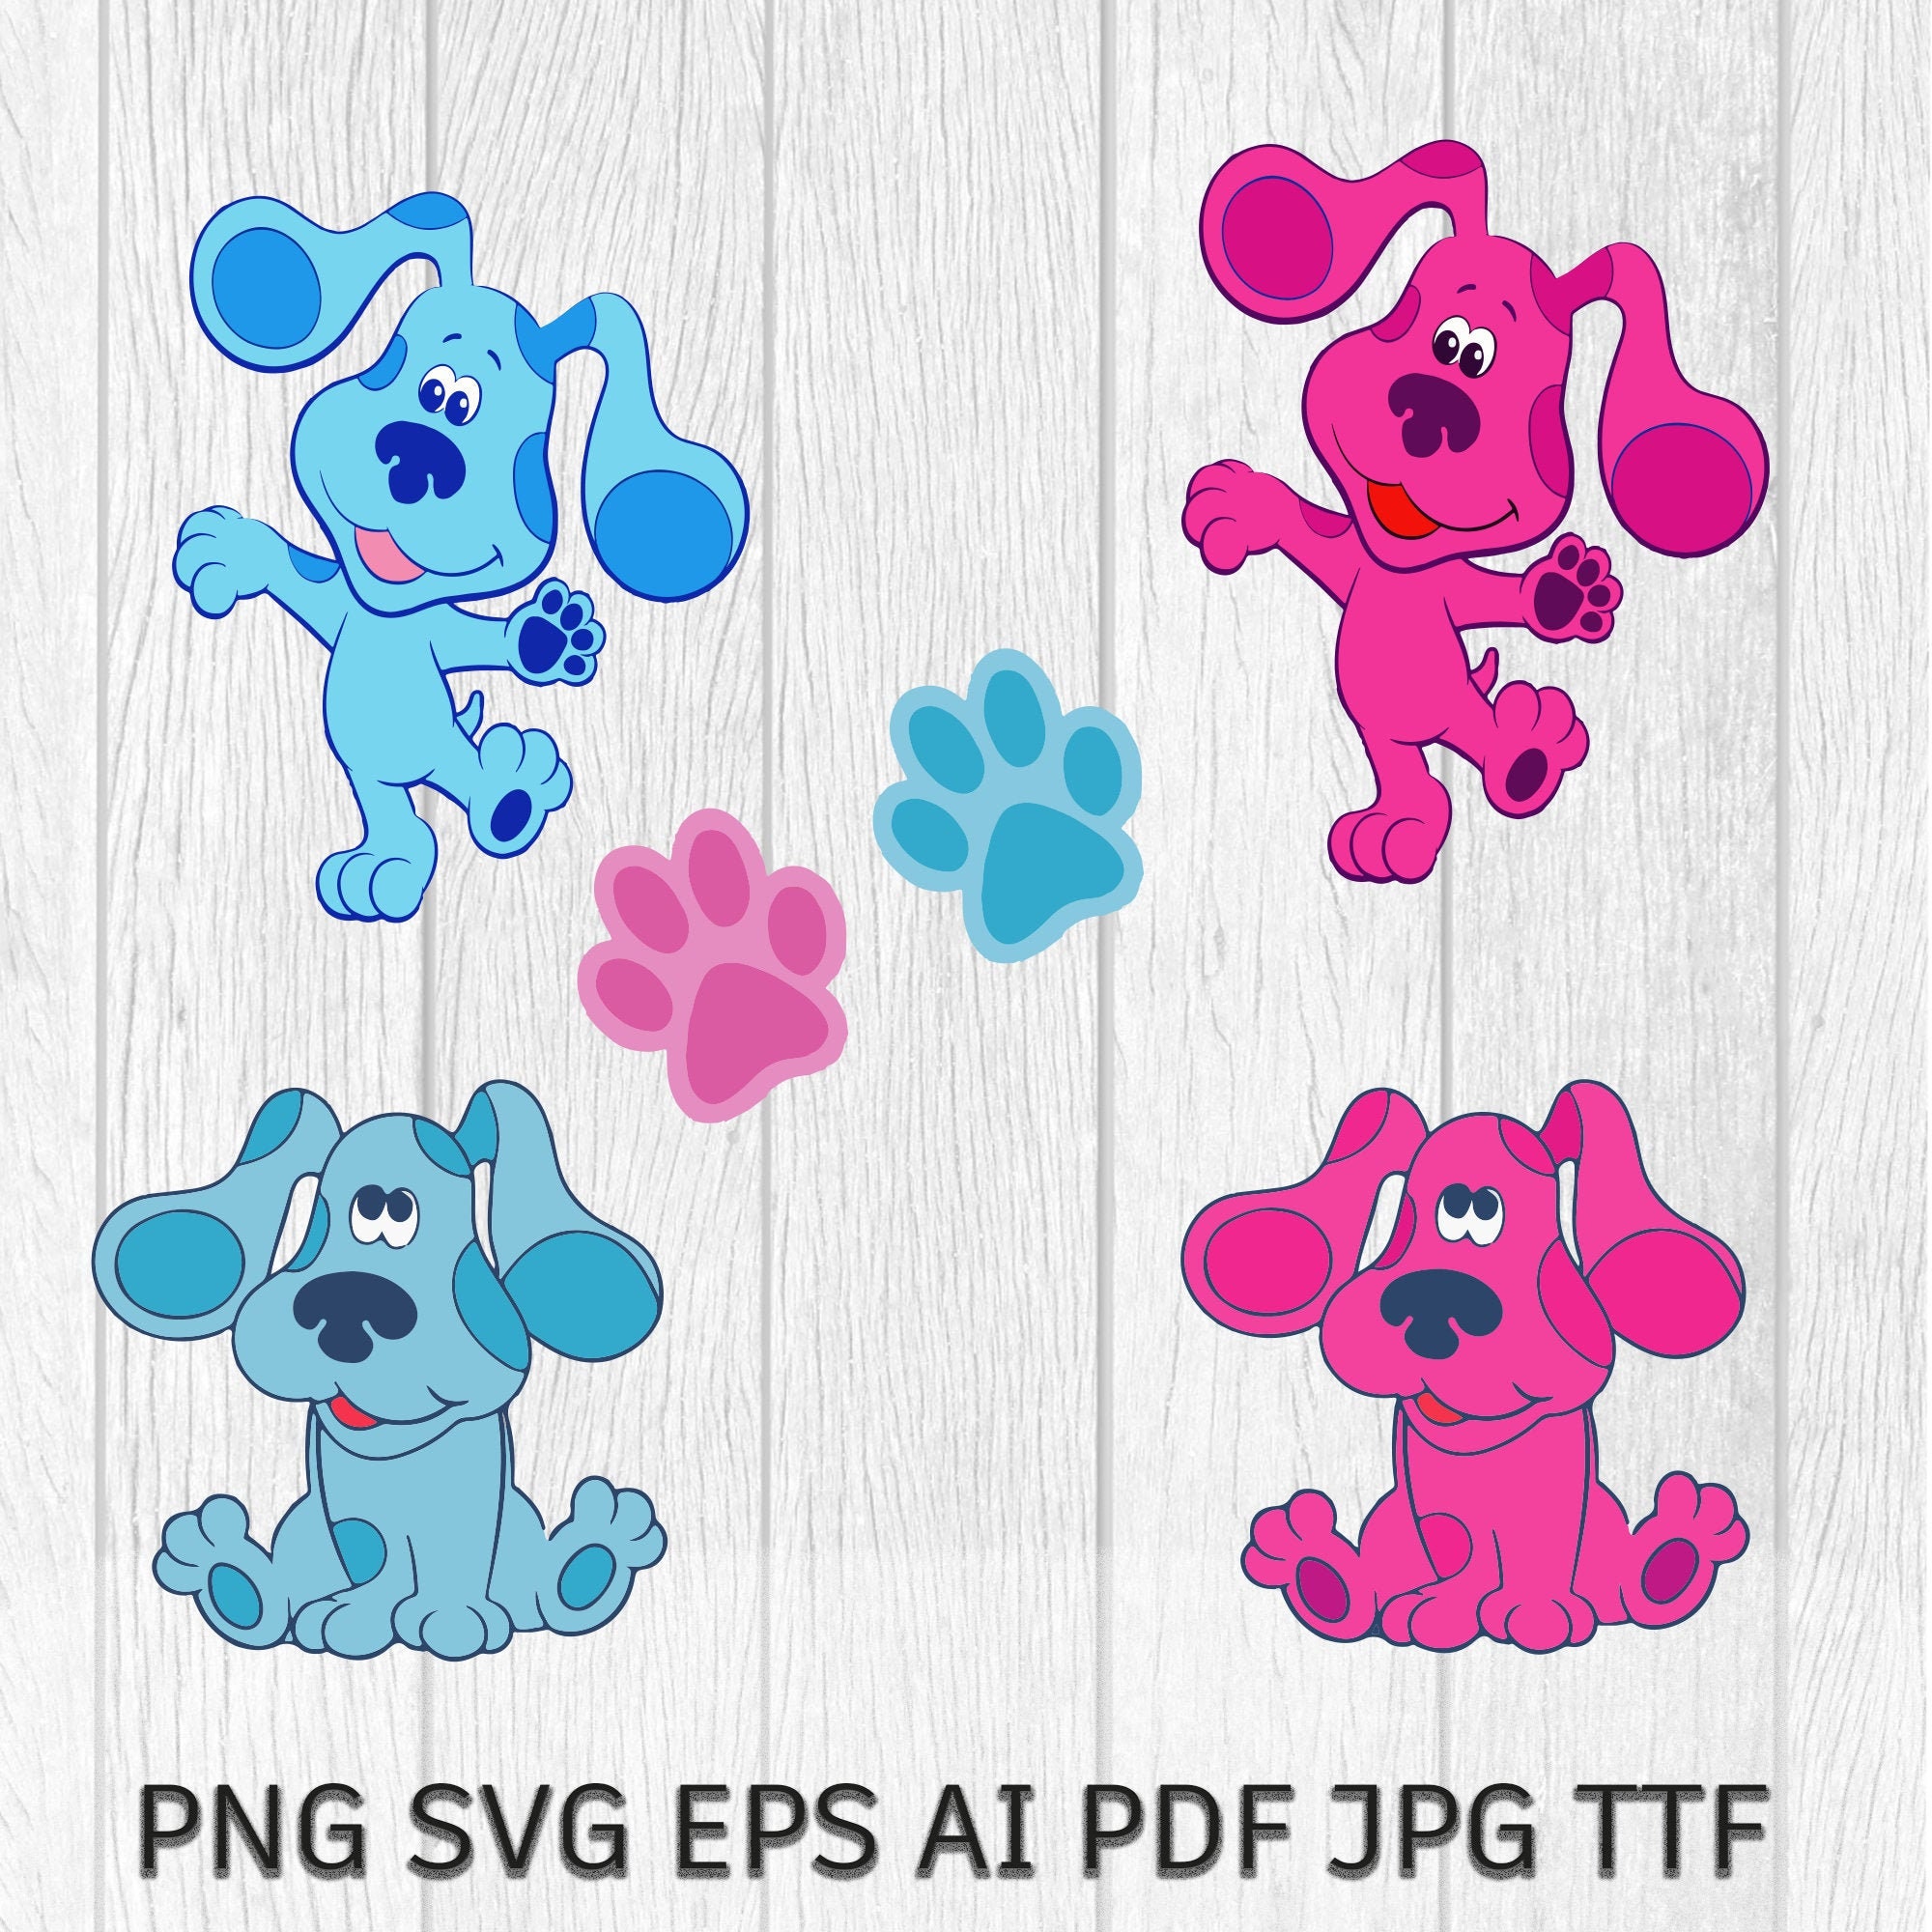 Magenta Blues Clues Pink Png Blues Clues Png Free Transparent Png | The ...